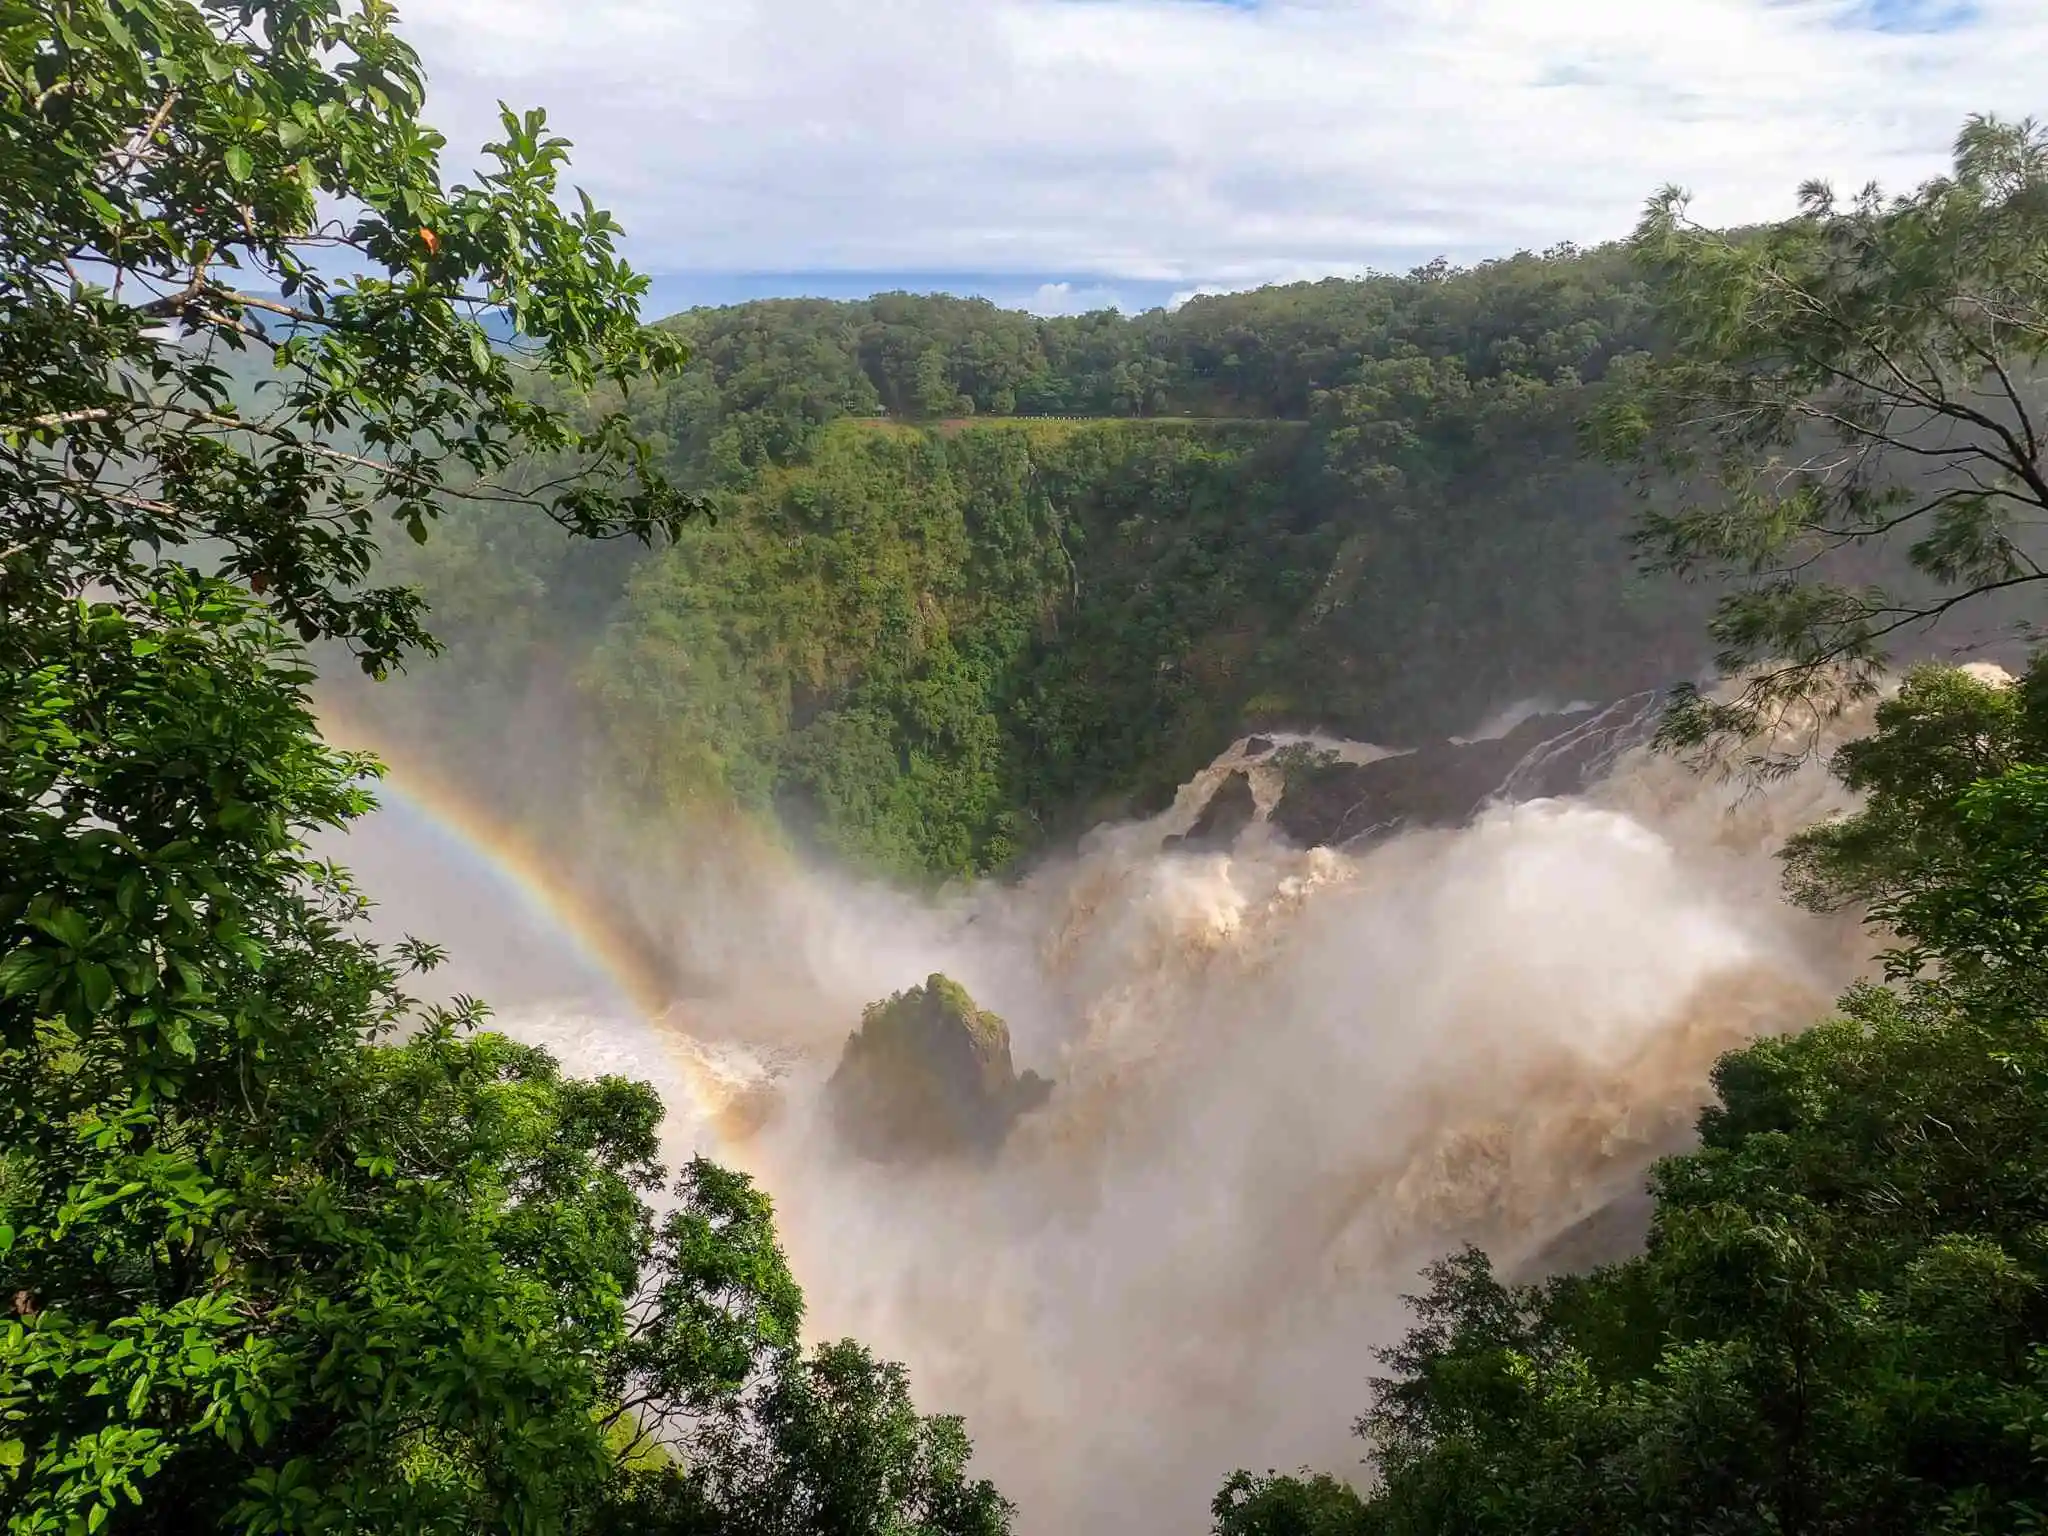 Impressive rainbow formations in a shroud of mist as the waterfall flows into the deep gorge.